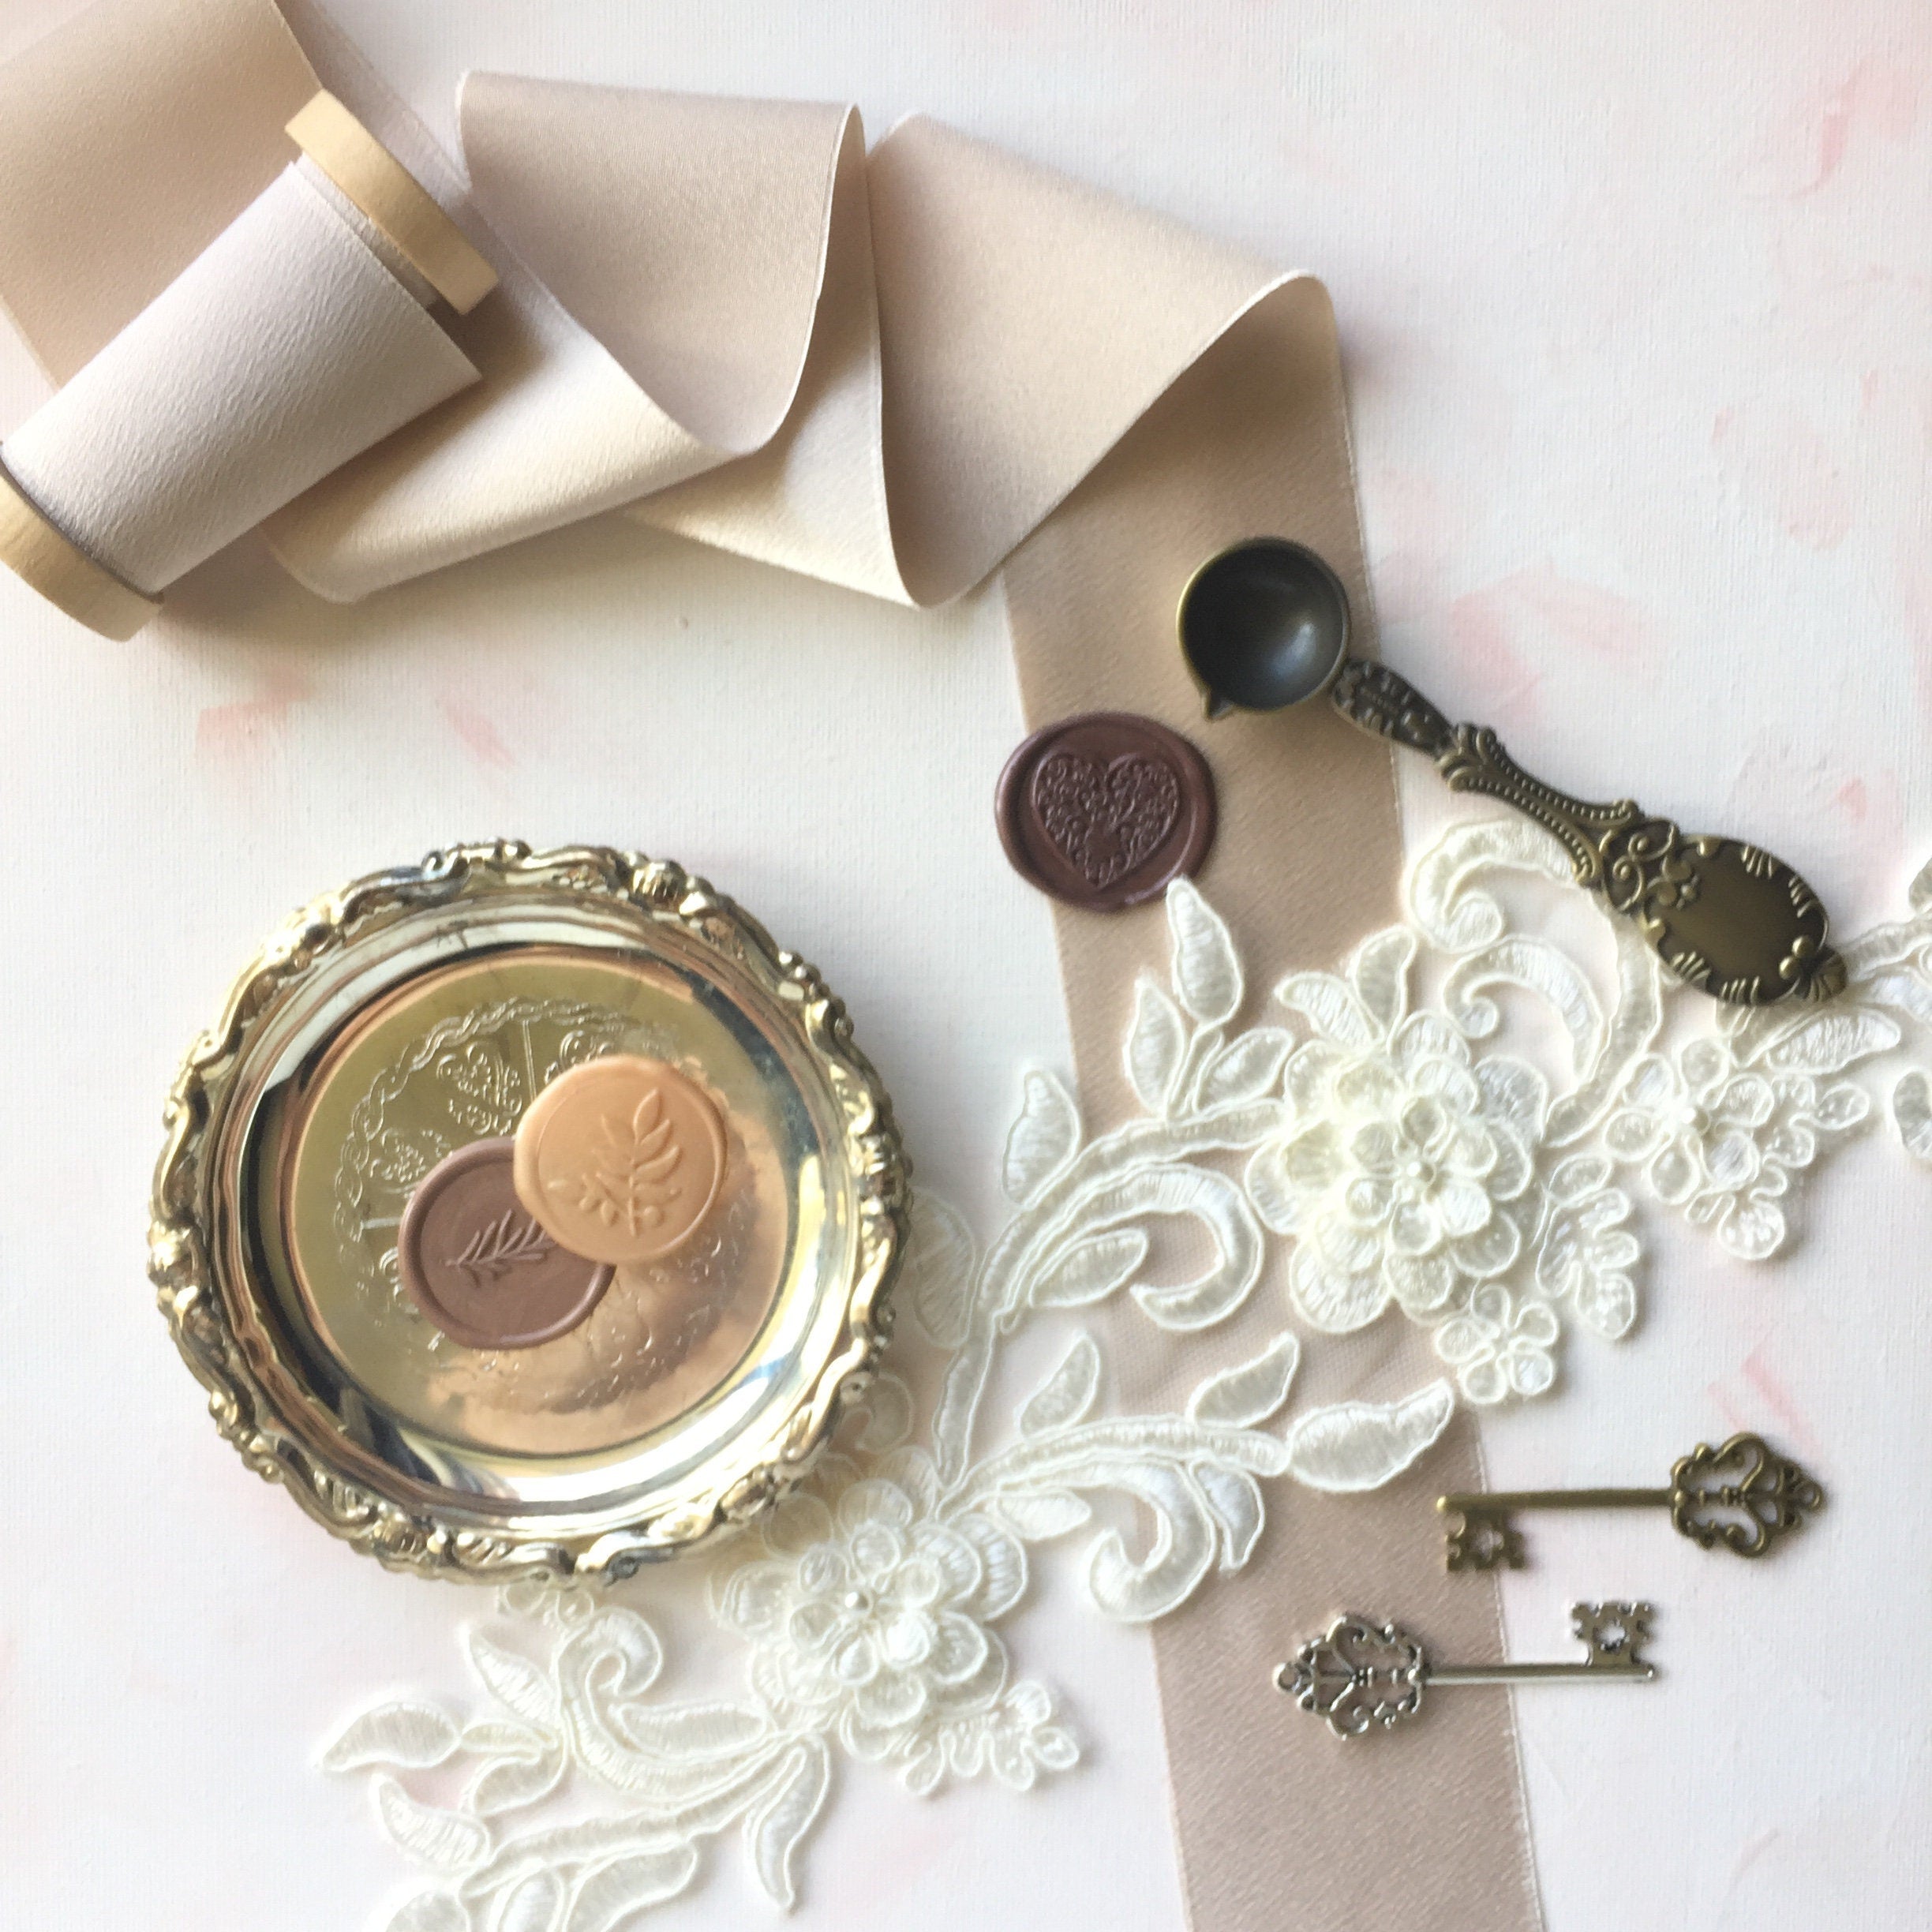 Vintage silver dish styled with wax seals, silver and gold keys, a piece of lace, vintage spoon and neutral ribbon - Wedding Flat lay props from Champagne & GRIT